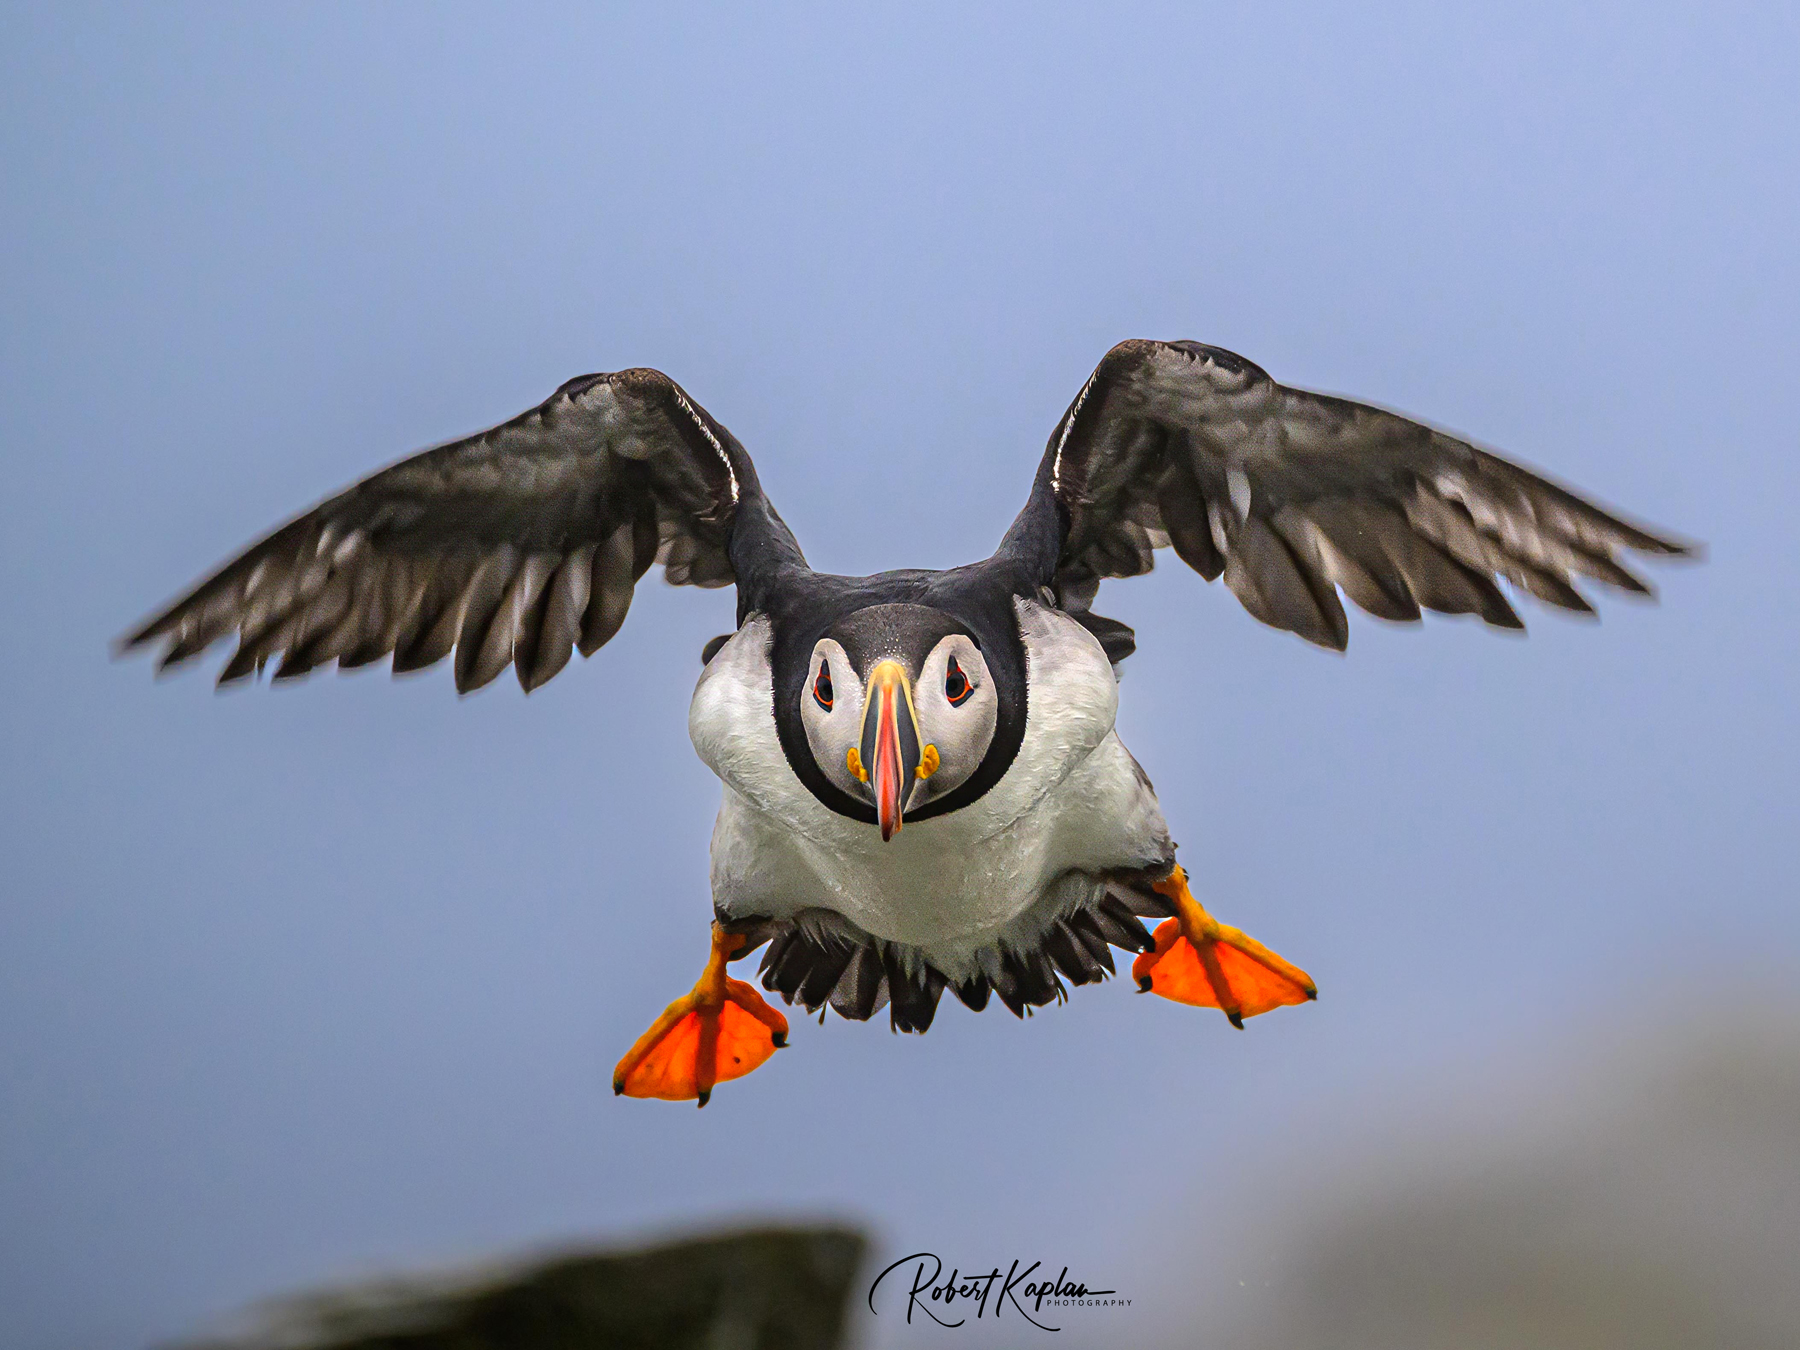 Fkying Puffin_small2420-.jpg